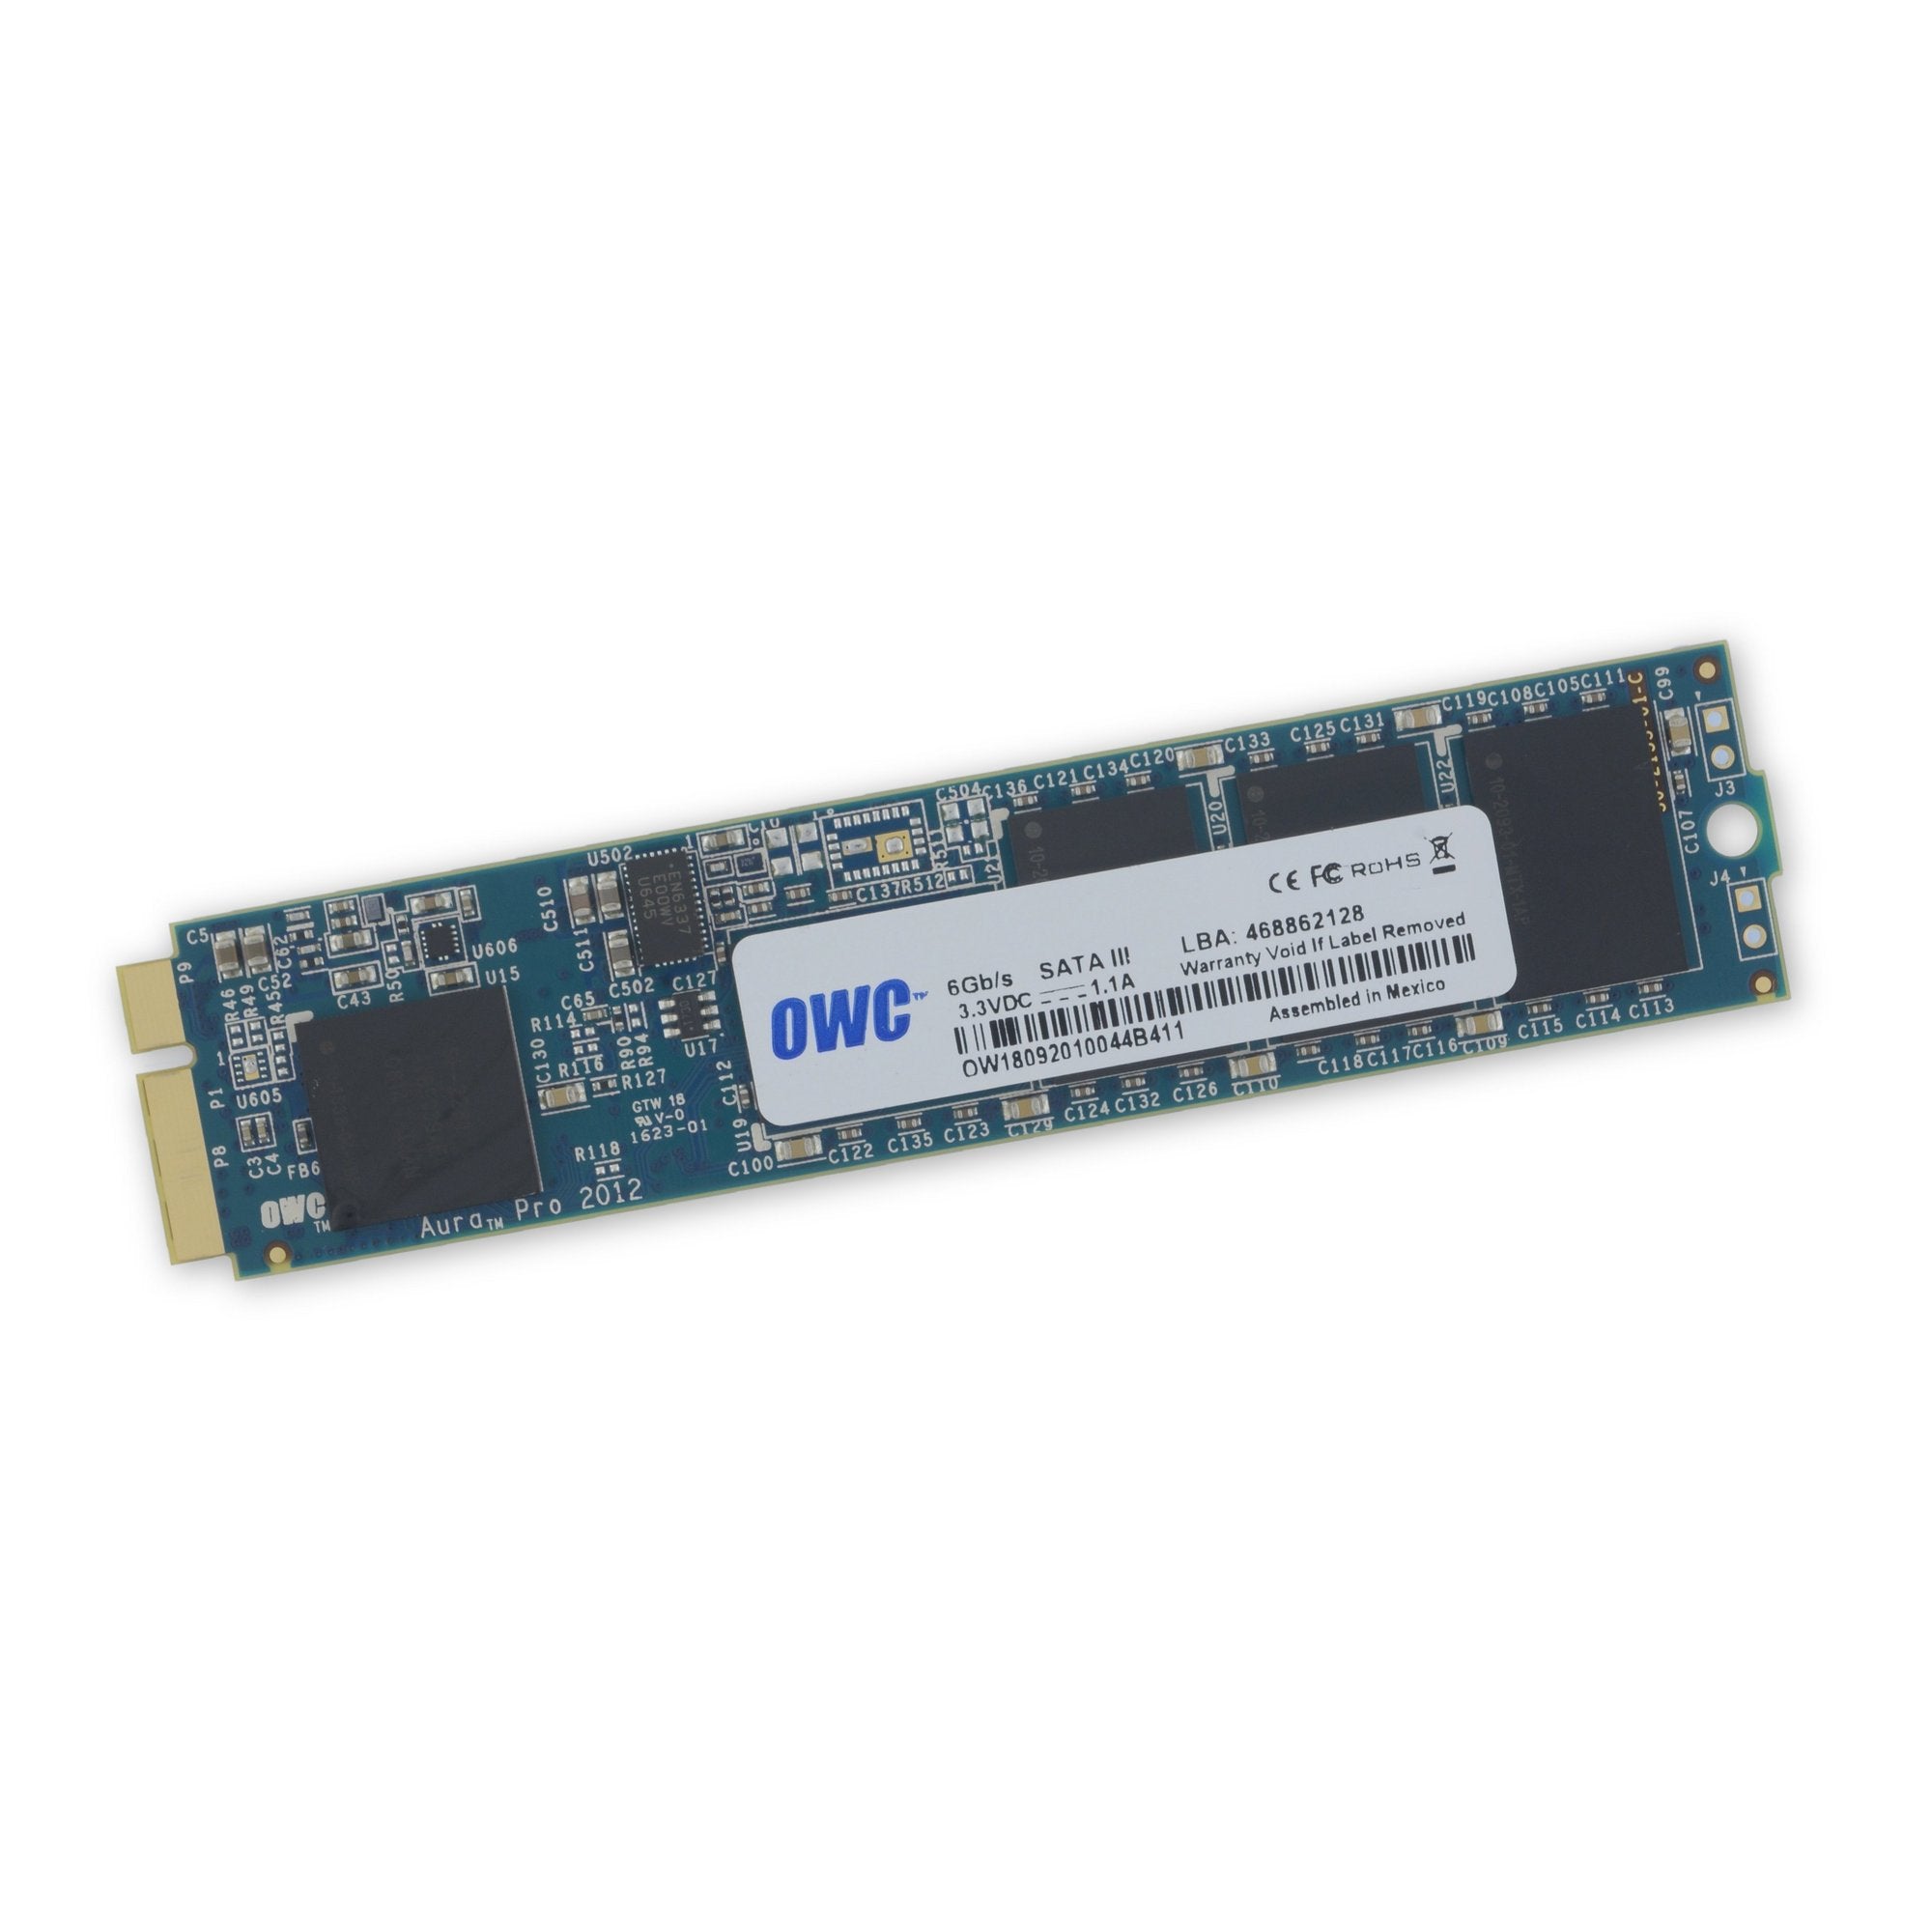 OWC Aura Pro 6G SSD for MacBook Air 11" and 13" (Mid 2012)